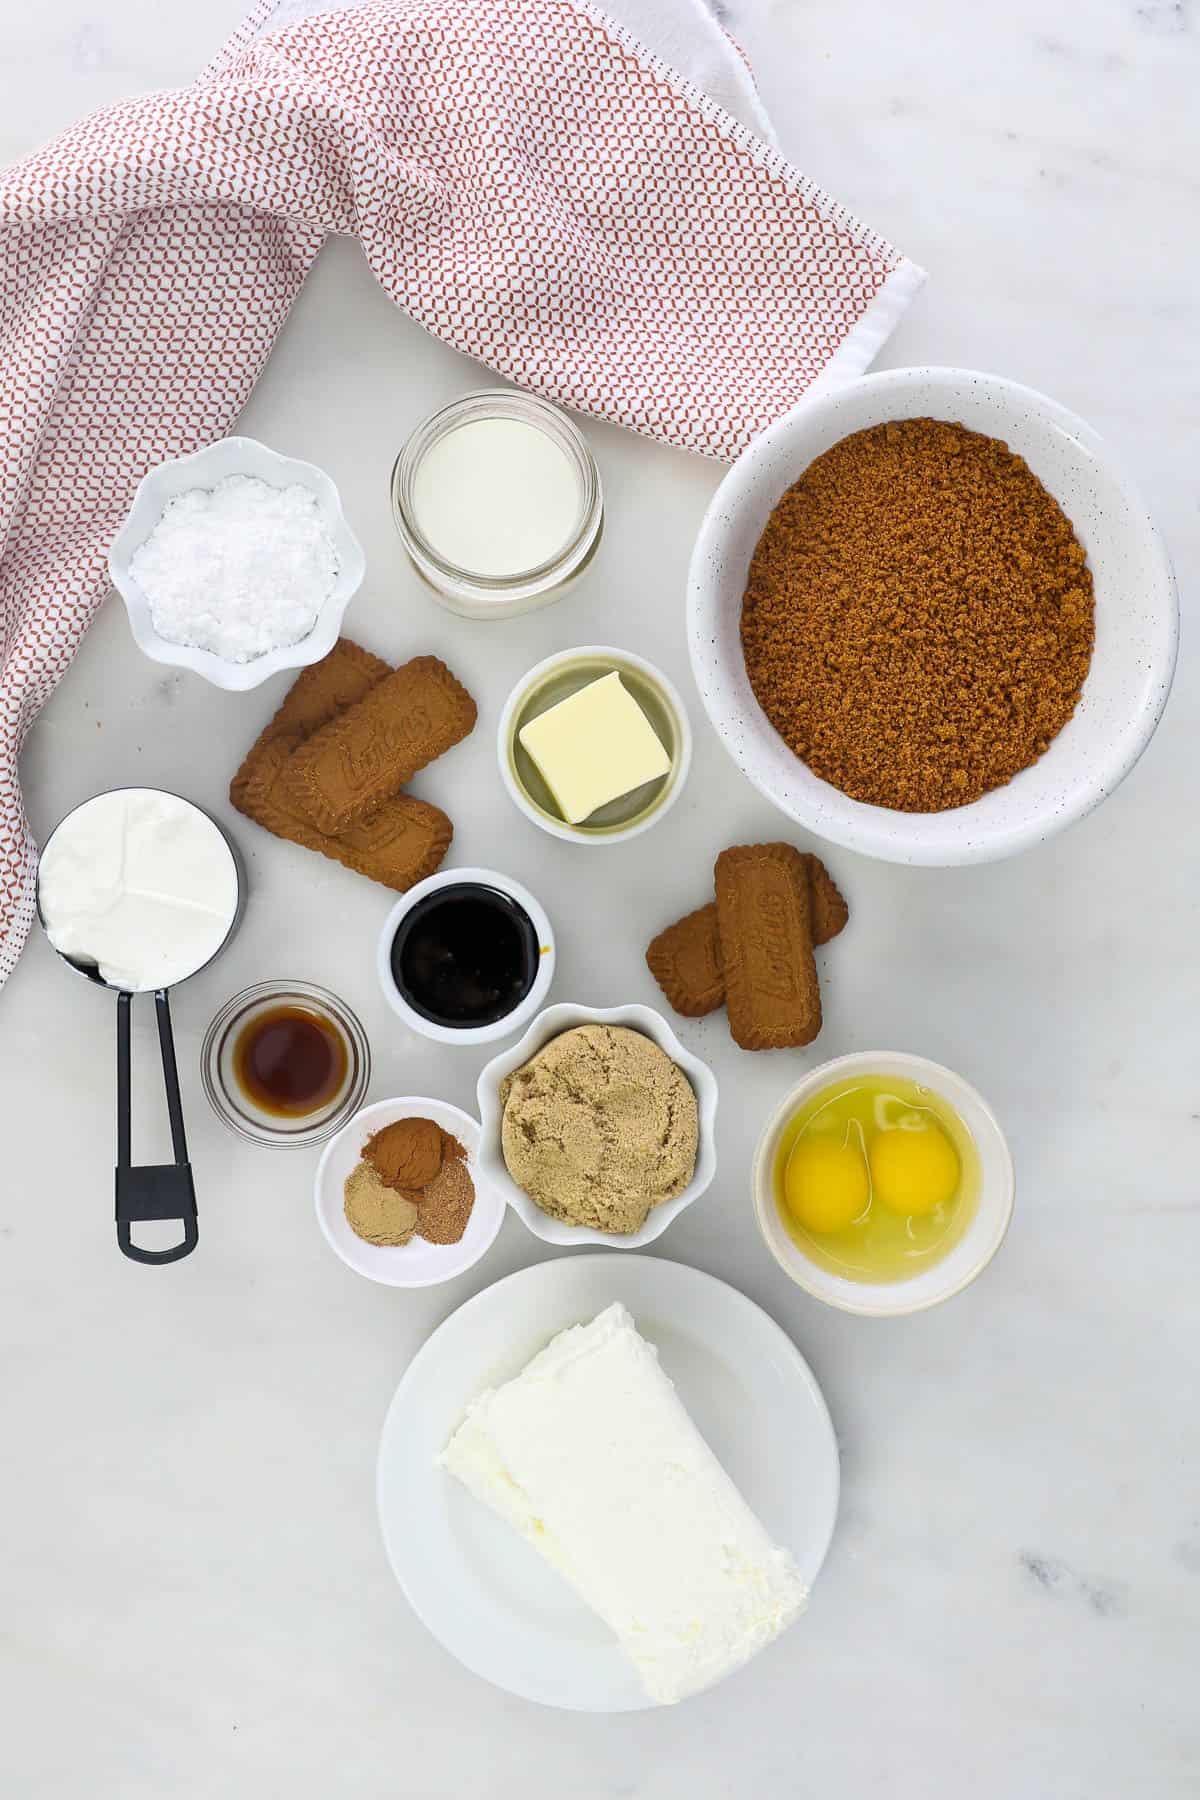 Ingredients for Gingerbread cheesecakes laid out in bowls